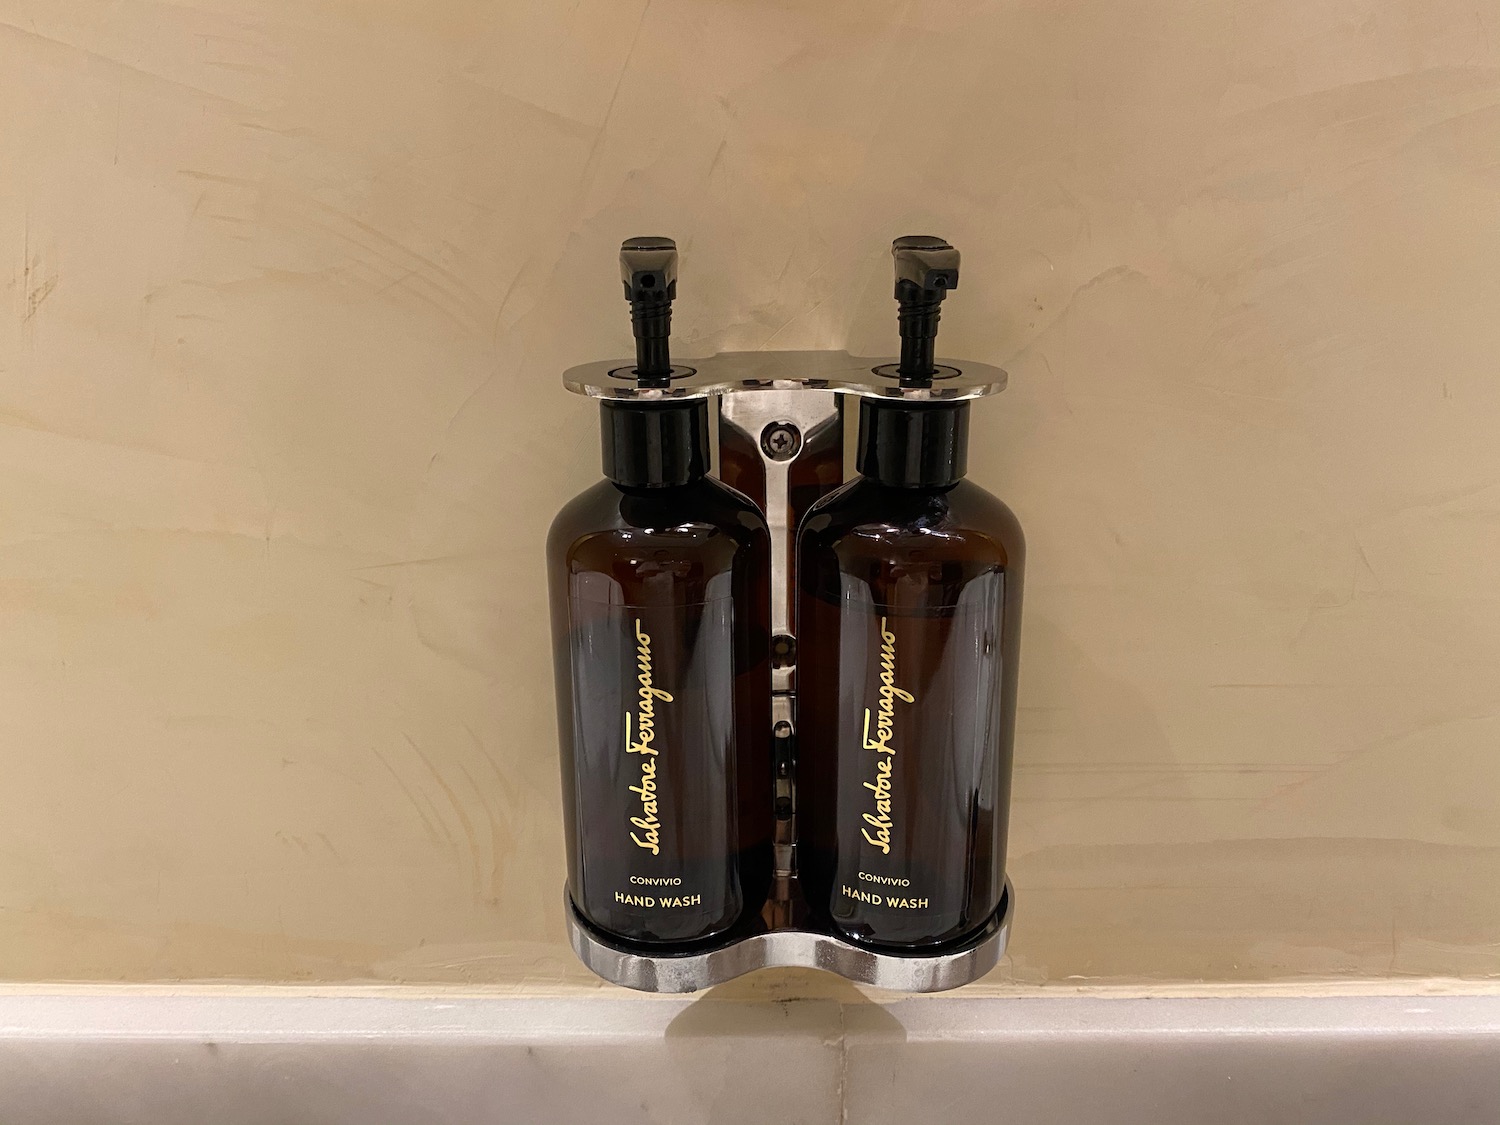 a couple of brown bottles on a metal holder